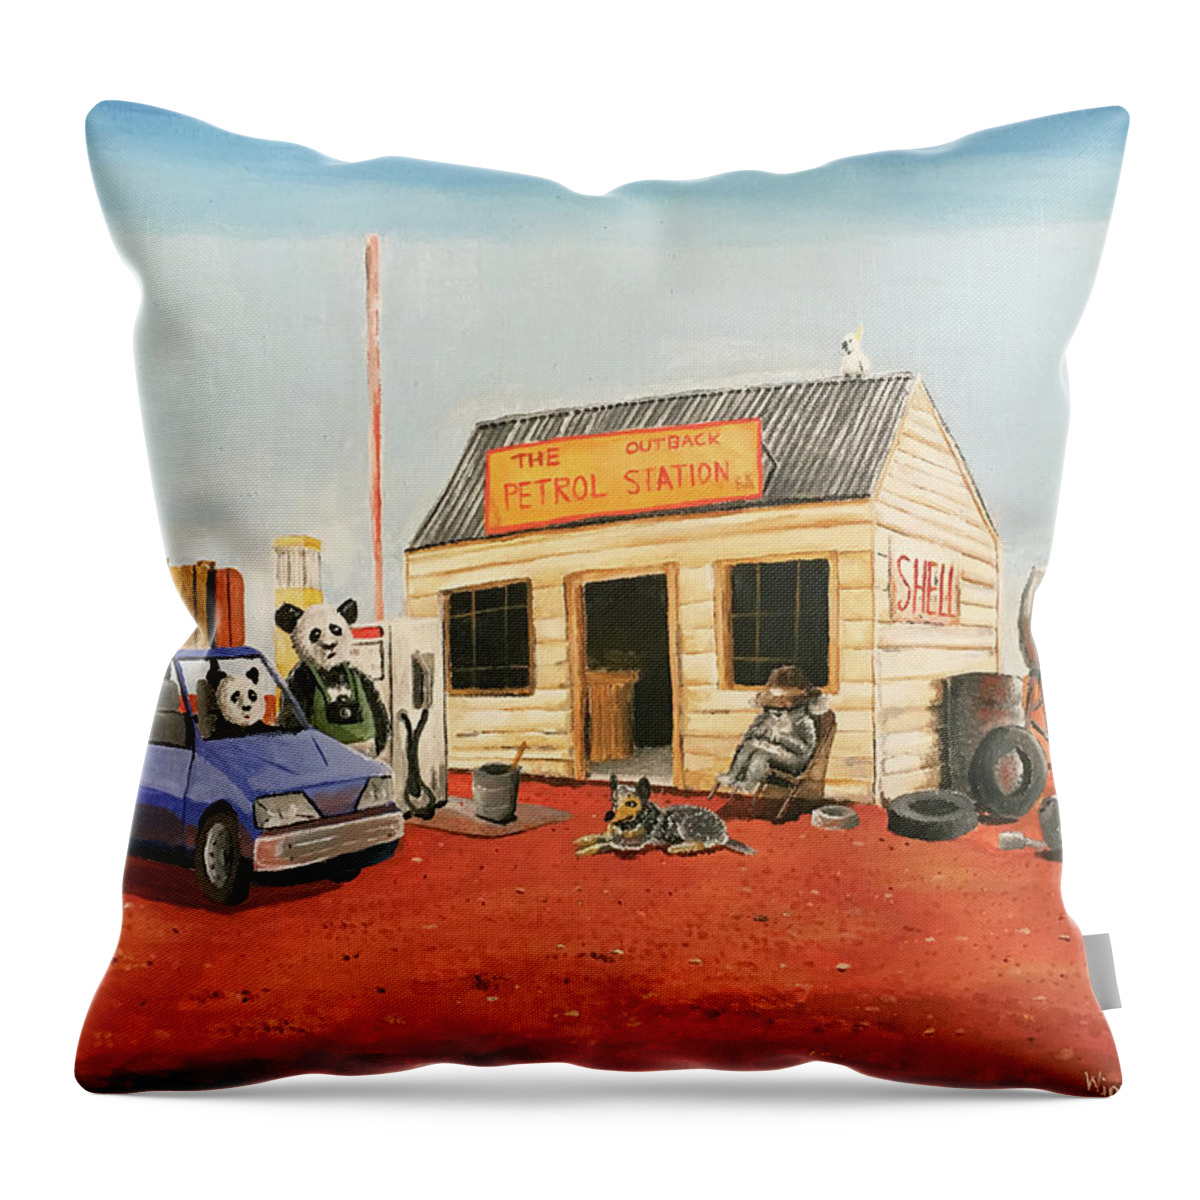 Outback Petrol Station Throw Pillow featuring the painting The Outback Petrol Station by Winton Bochanowicz